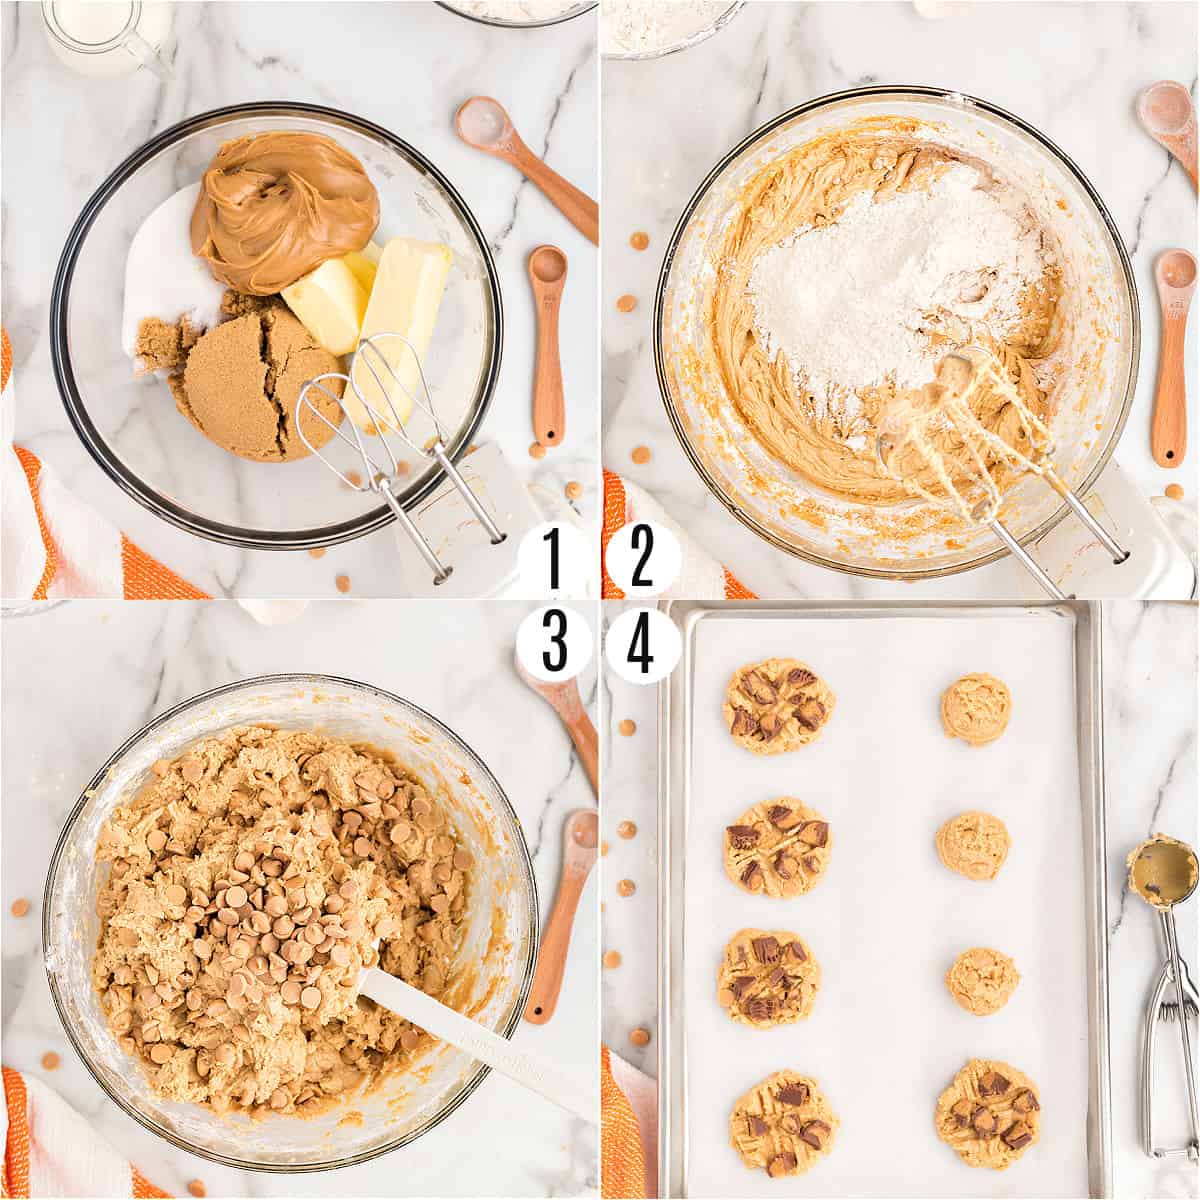 Step by step photos showing how to make peanut butter cup cookies.